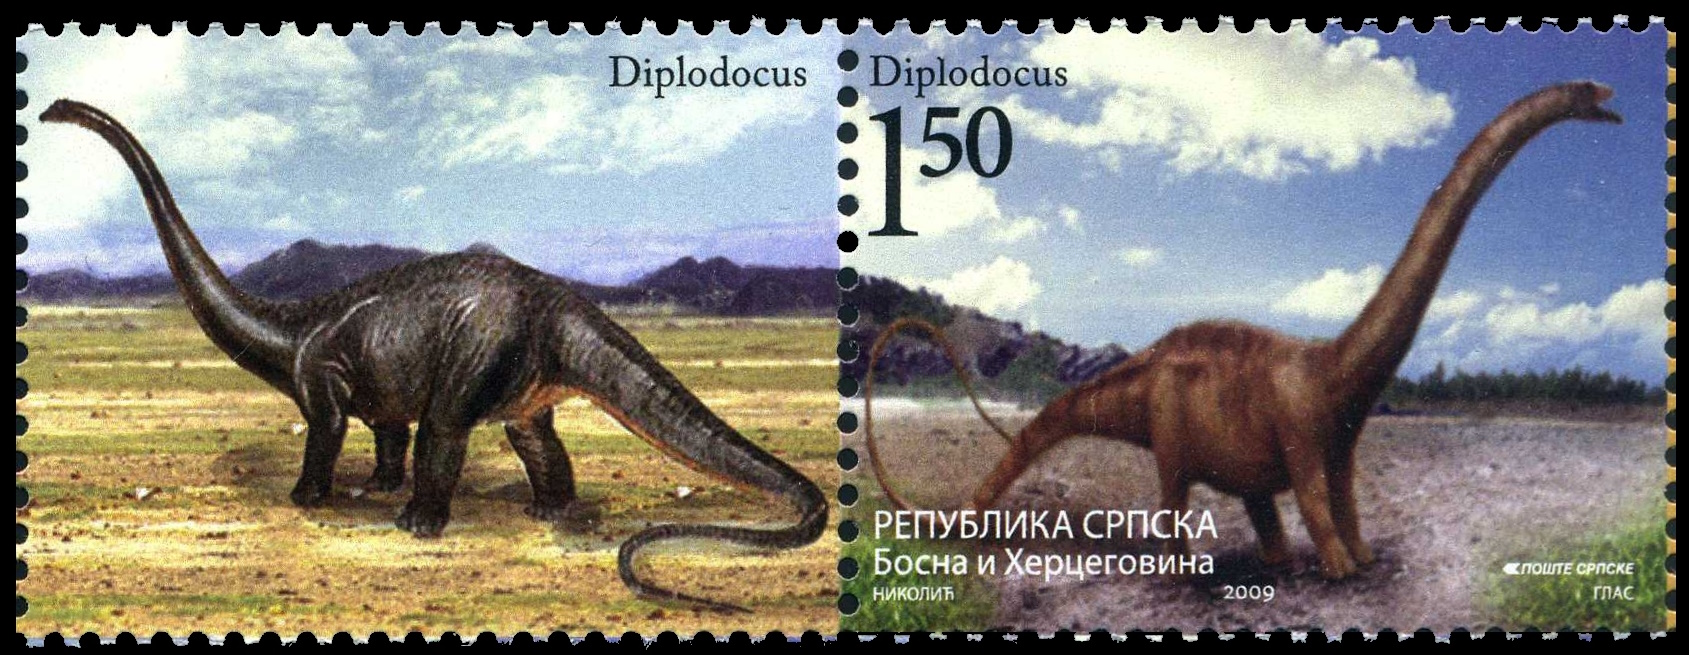 Diplodocus stamp with a tab from the middle of the Mini-Sheet of Bosnia Herzegovina 2009